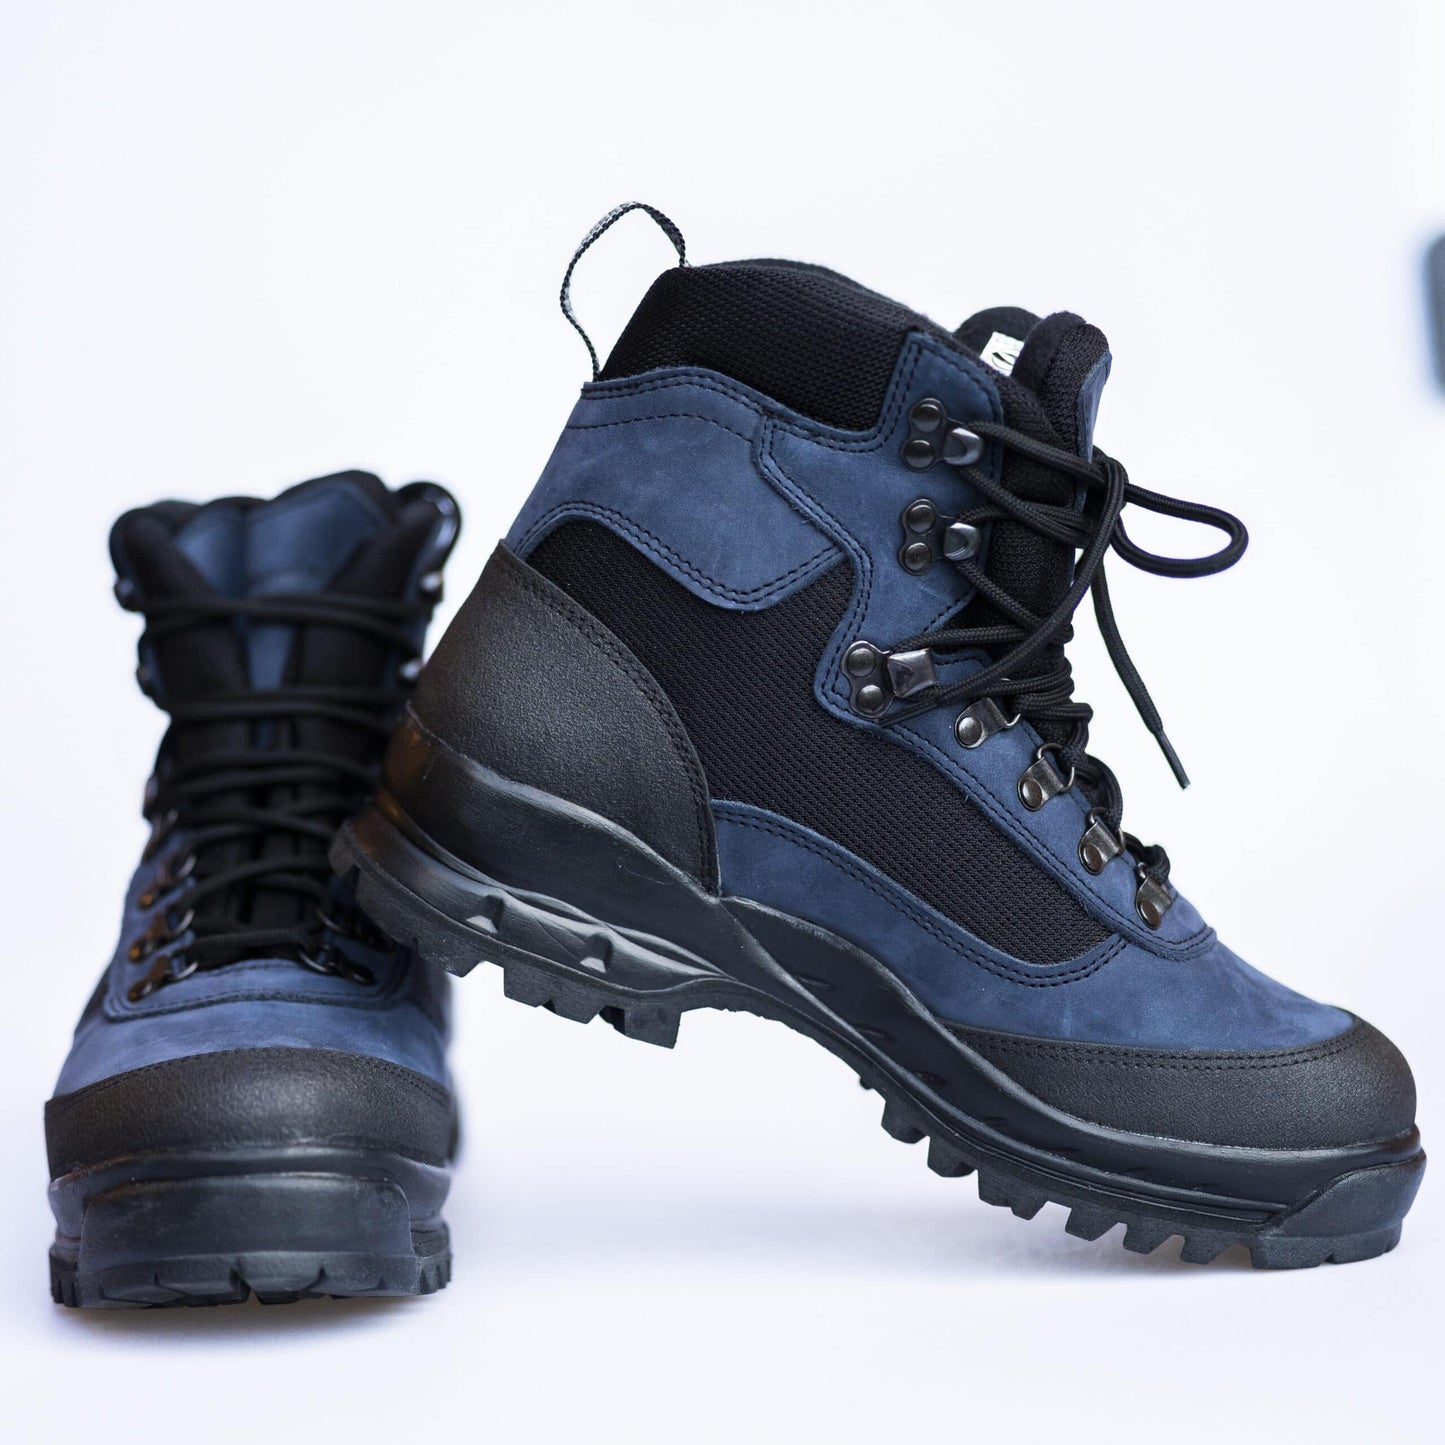 550 Navy Hiking boots